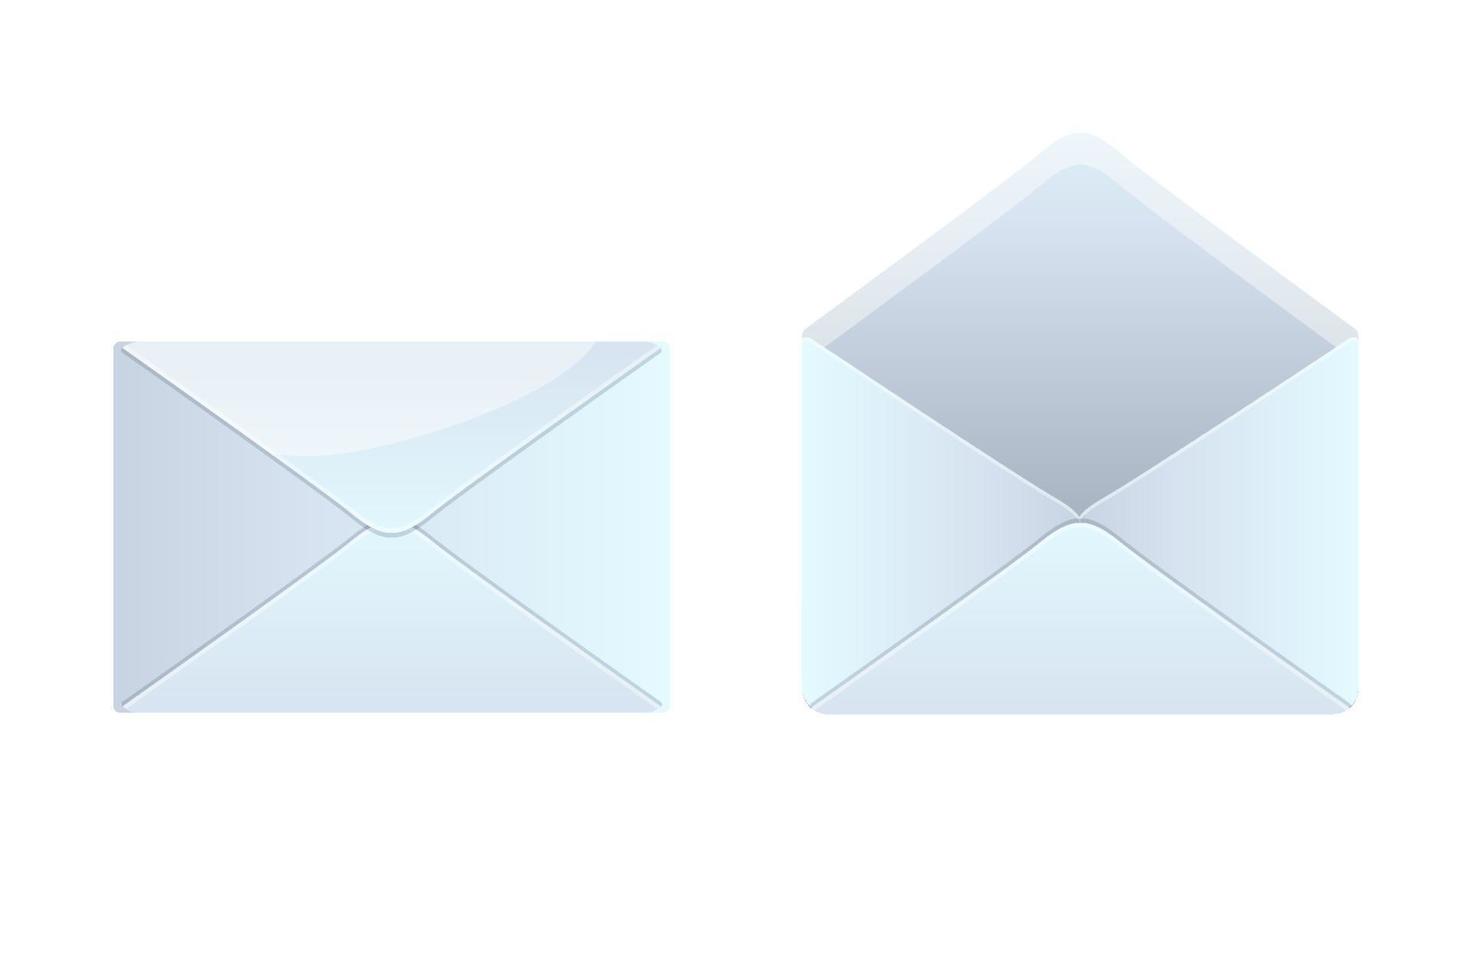 Isolated envelopes open and closed for graphic design. Vector illustration white blank envelopes for communication by mail.